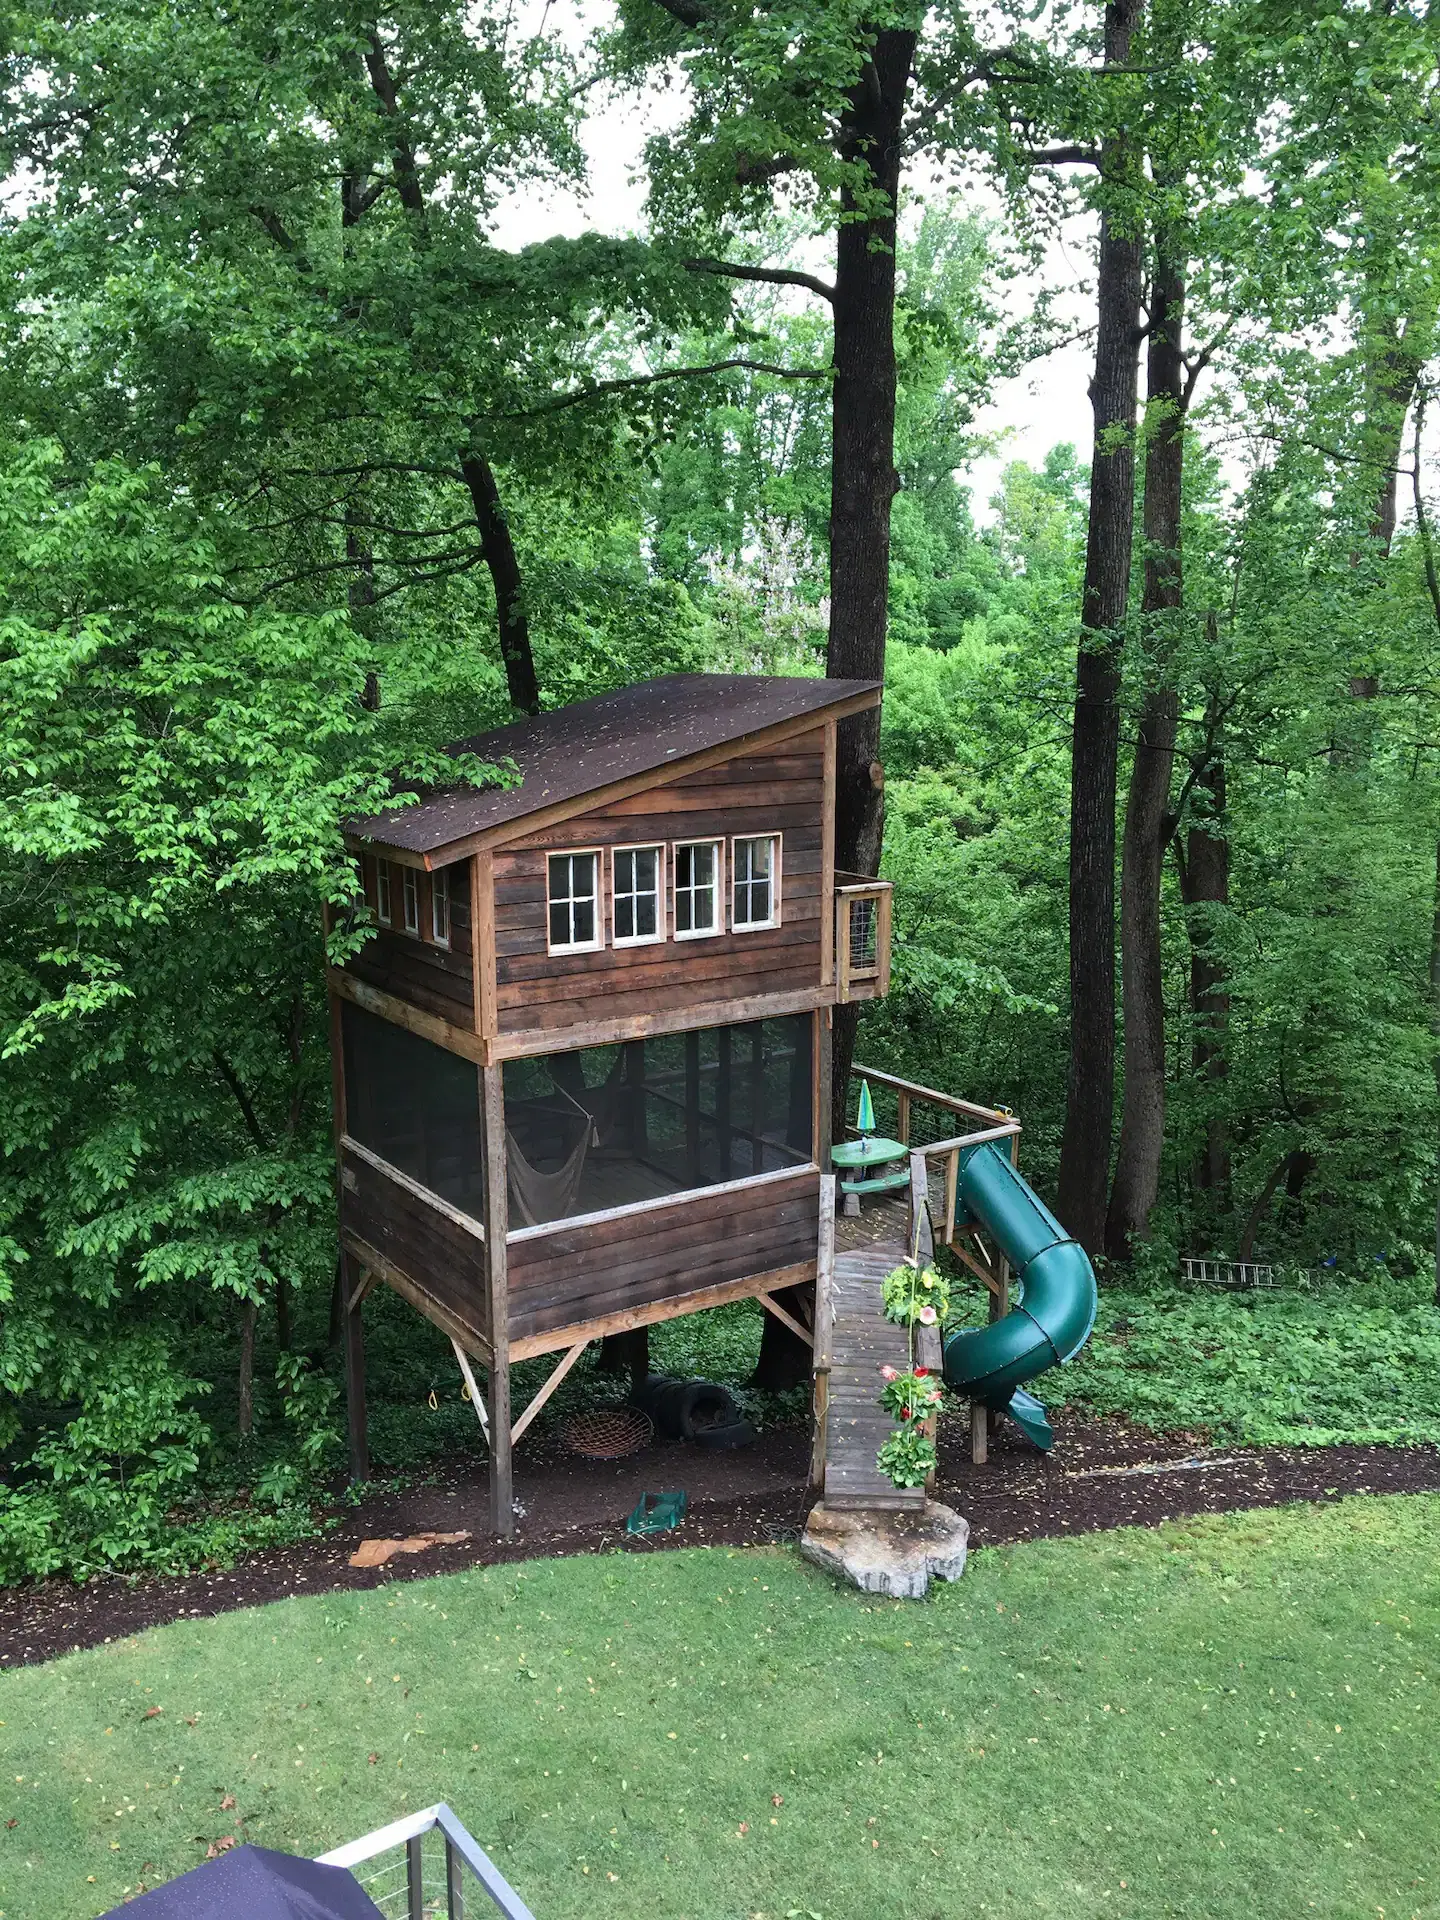 A wooden treehouse on stilts stands in a lush forested area with a slide attached.